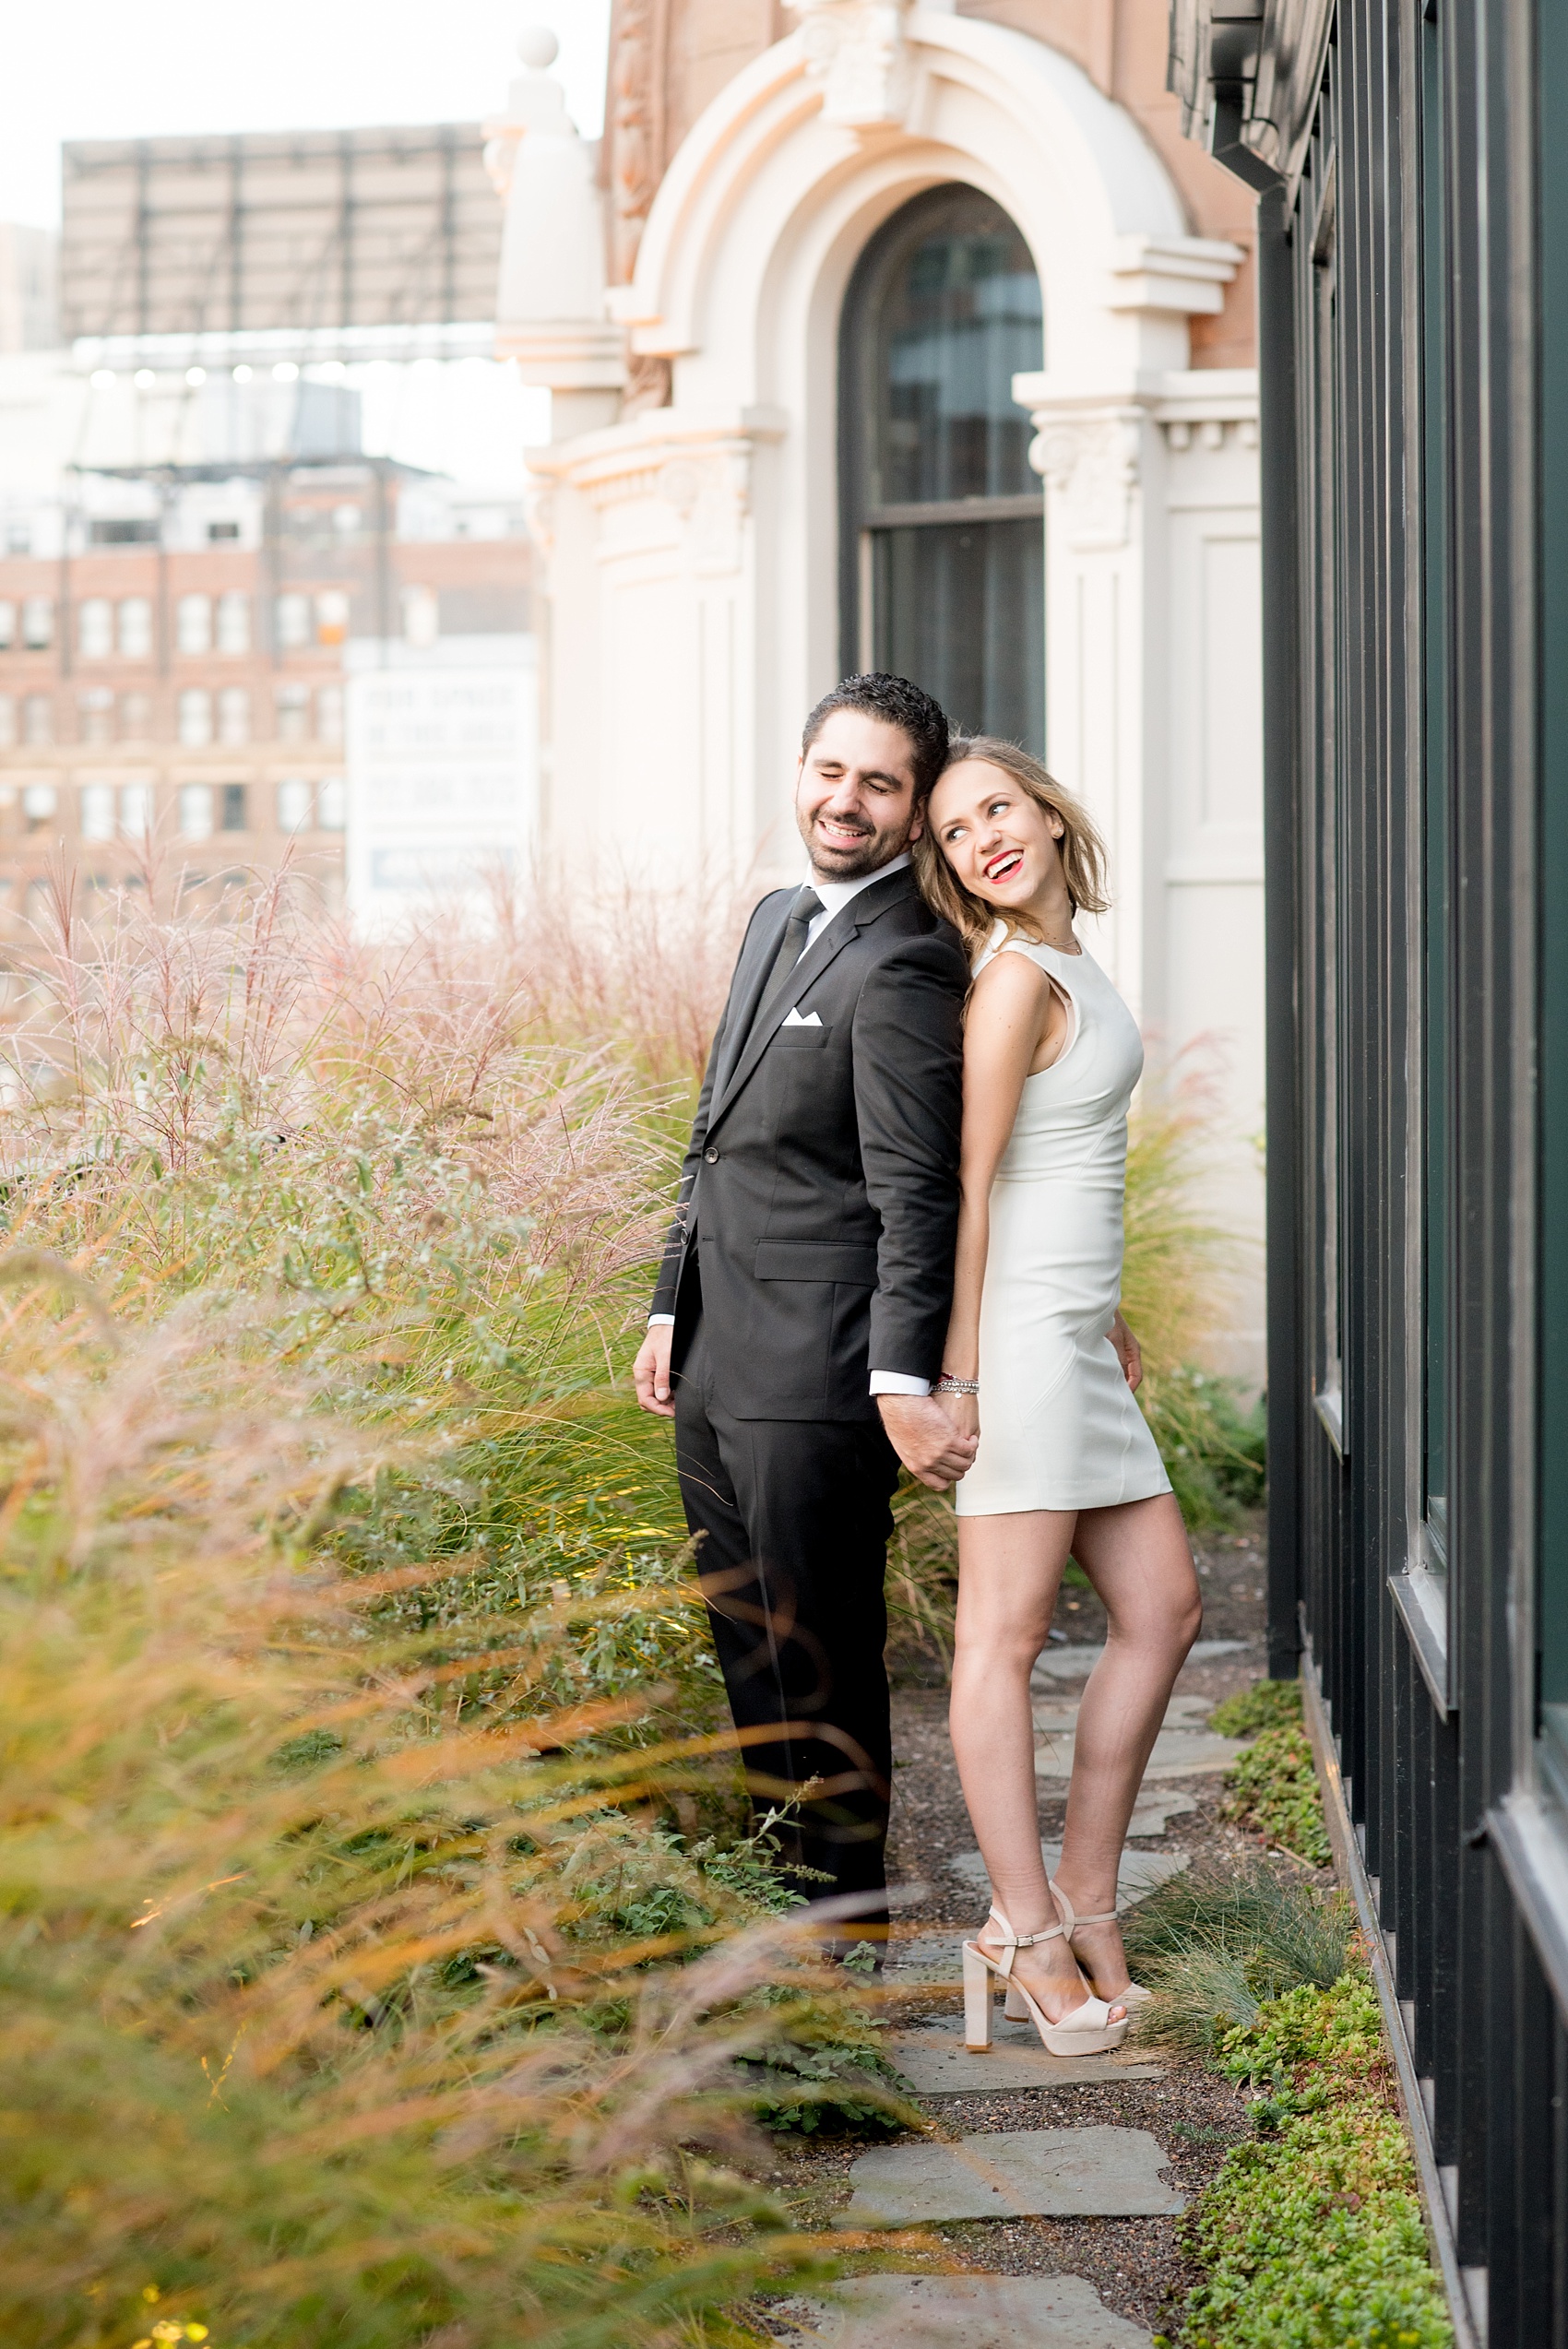 Mikkel Paige Photography photos of a surprise romantic NYC proposal at The Nomad Hotel. Rooftop photos of the newly engaged couple!